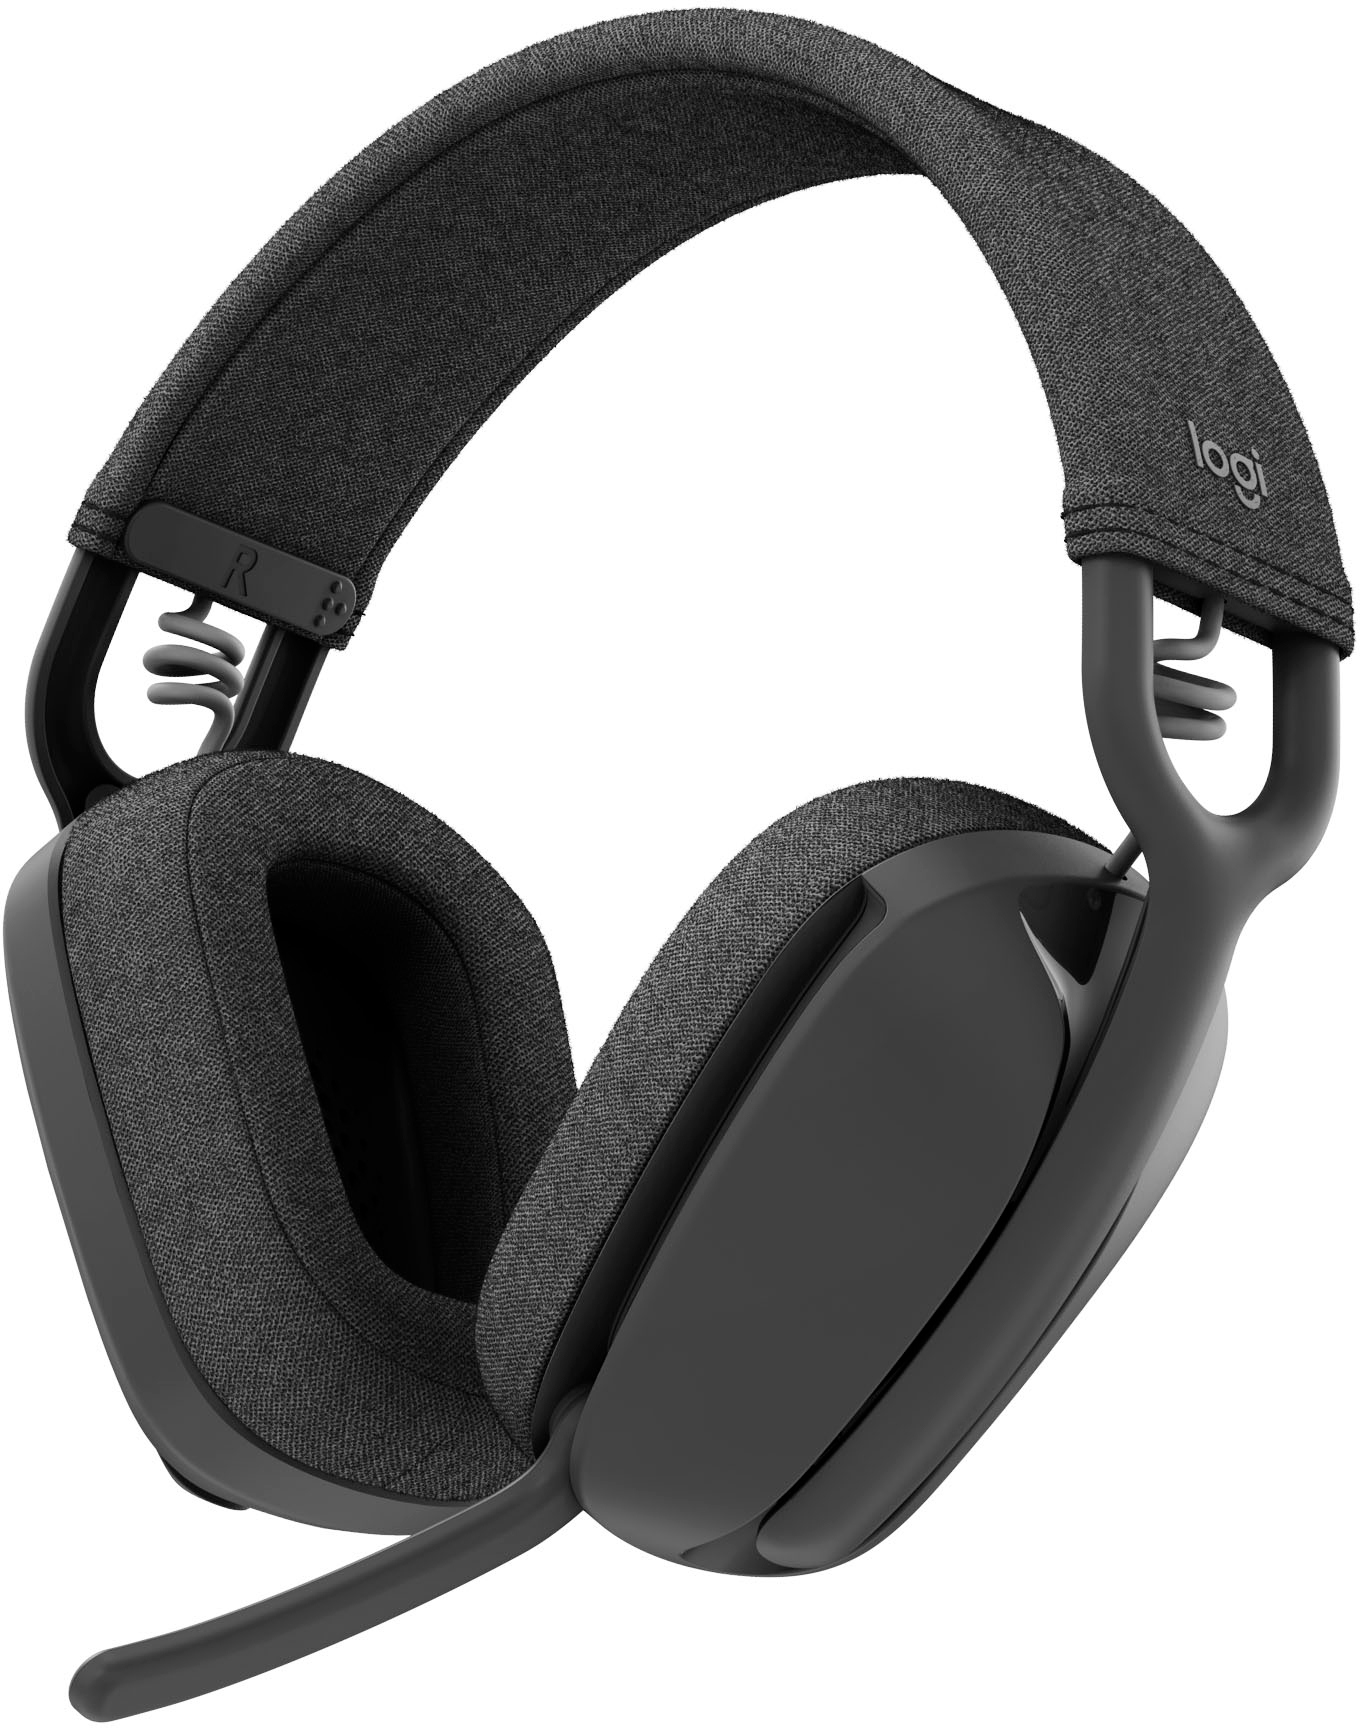 Logitech Zone Vibe Bluetooth Ear Headphones with Noise-Cancelling Microphone Graphite 981-001256 - Best Buy